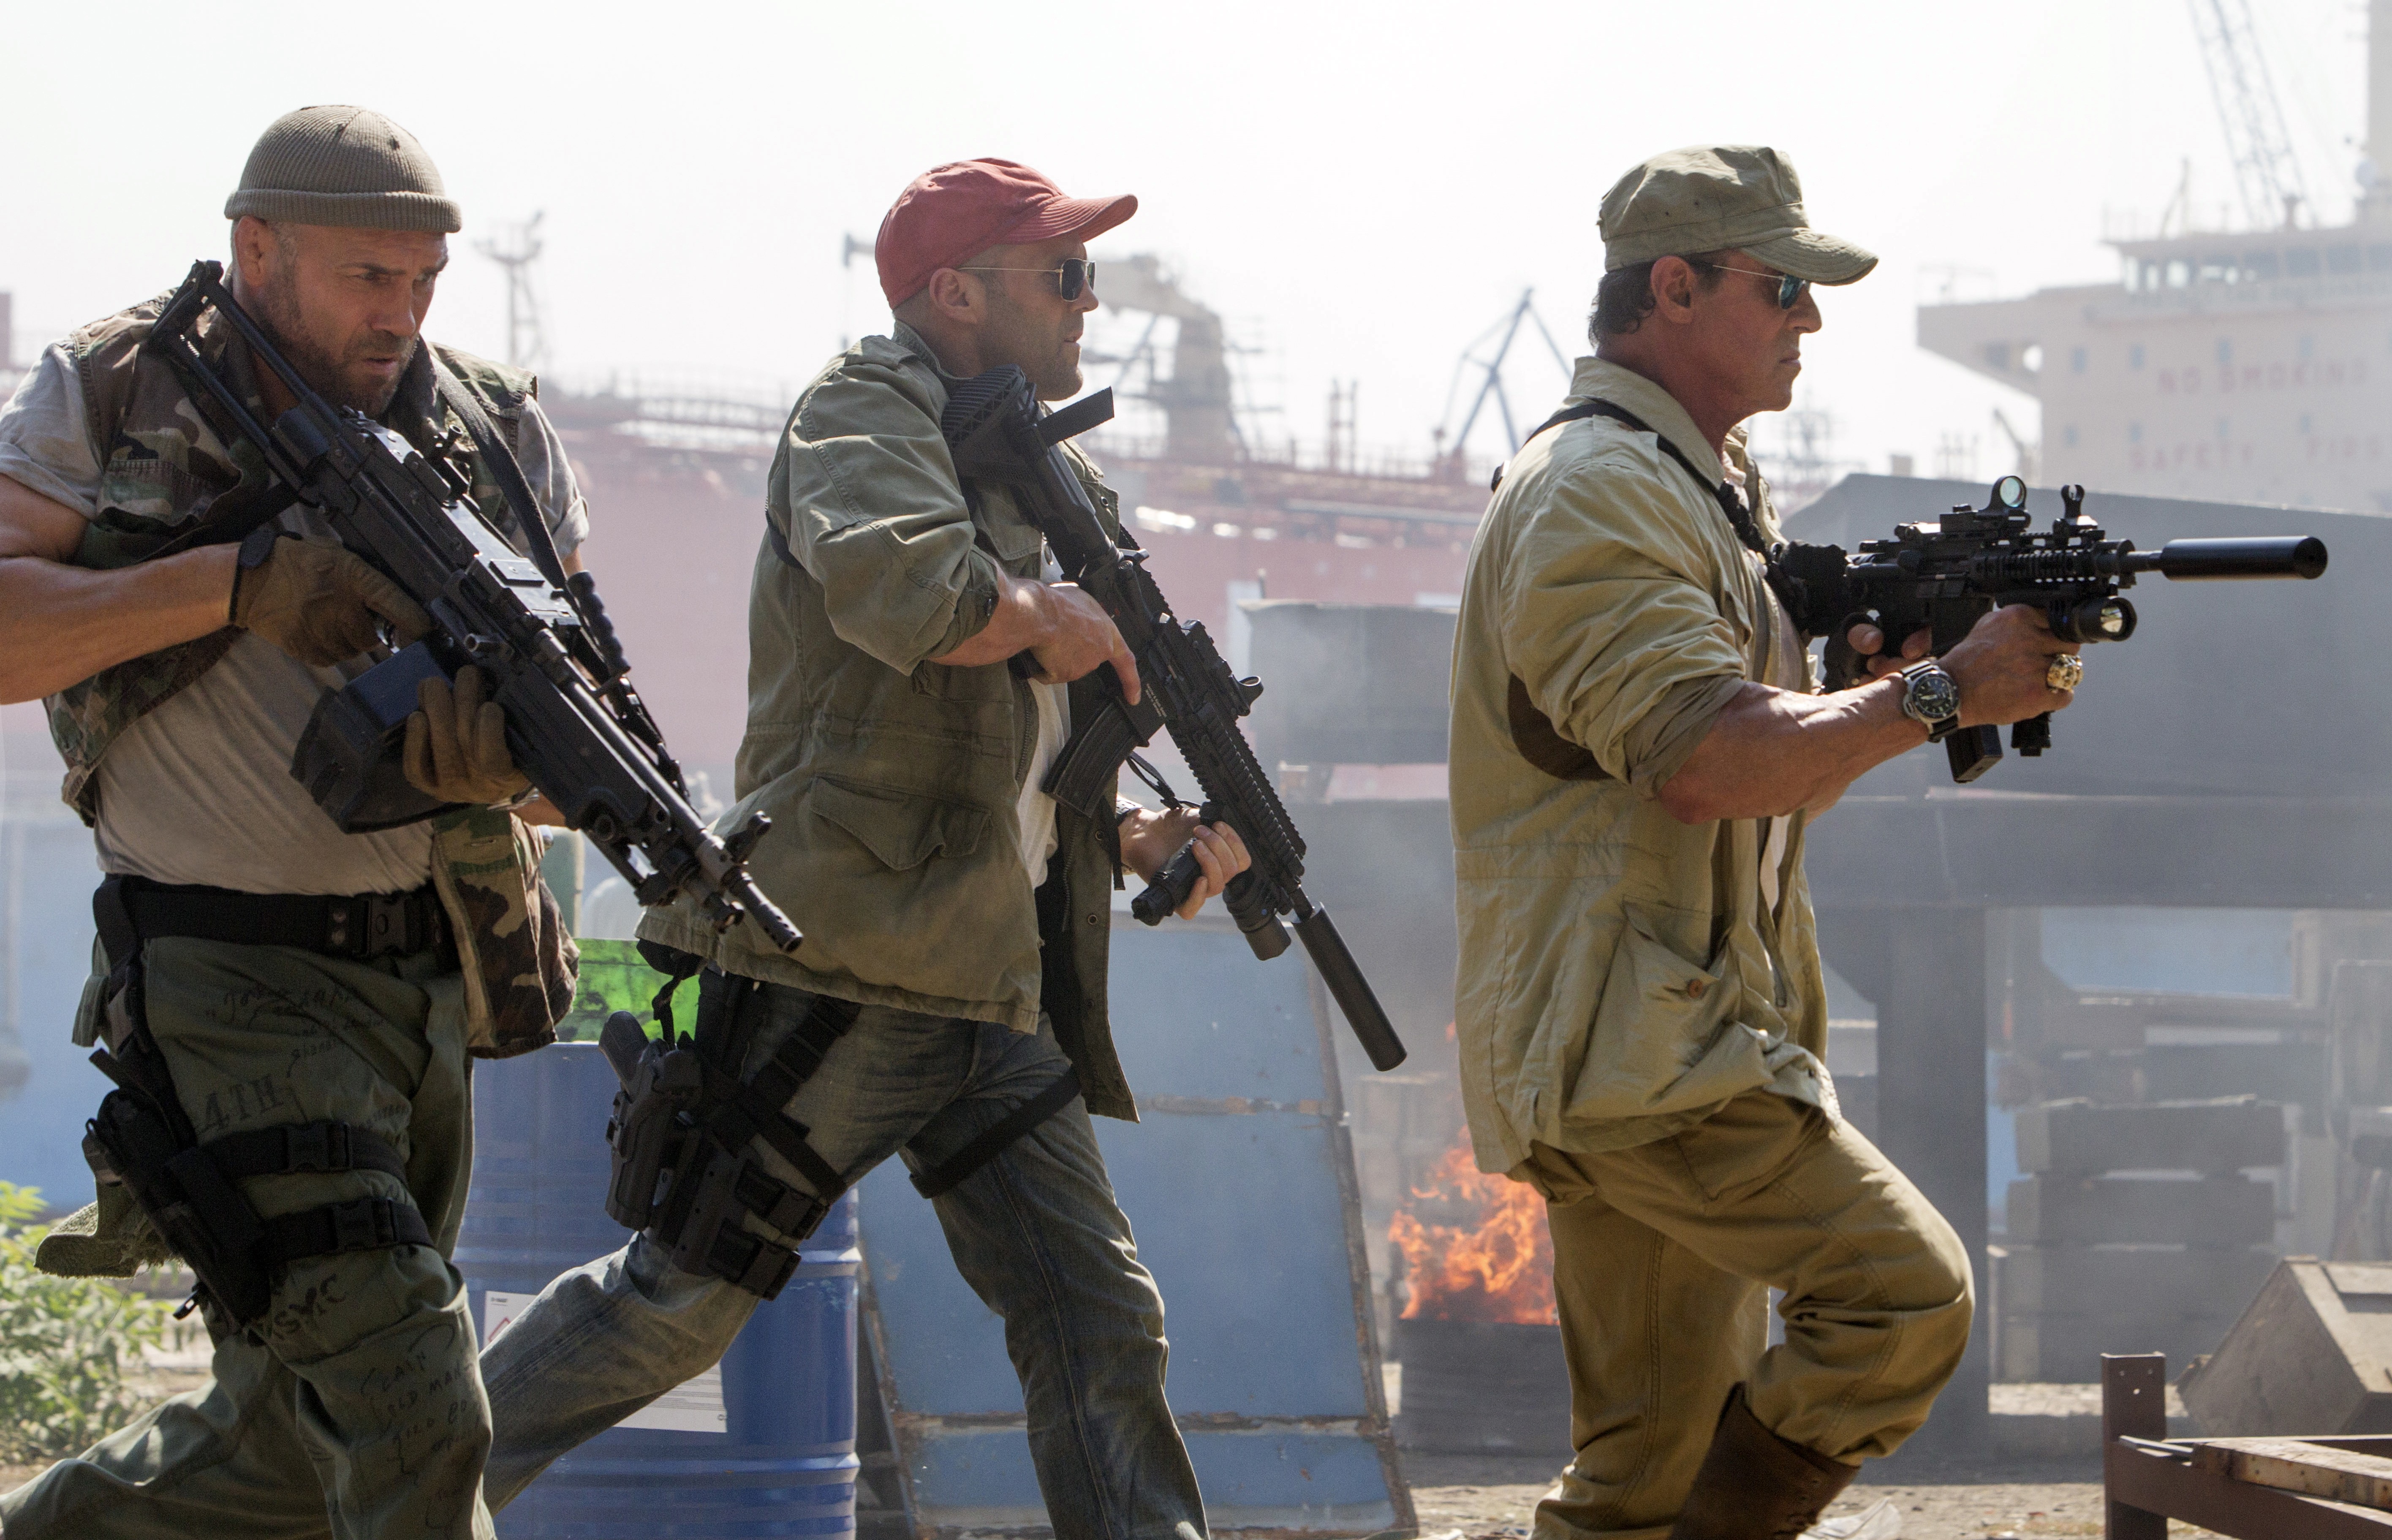 jason statham, movie, the expendables 3, barney ross, lee christmas, randy couture, sylvester stallone, toll road, the expendables lock screen backgrounds